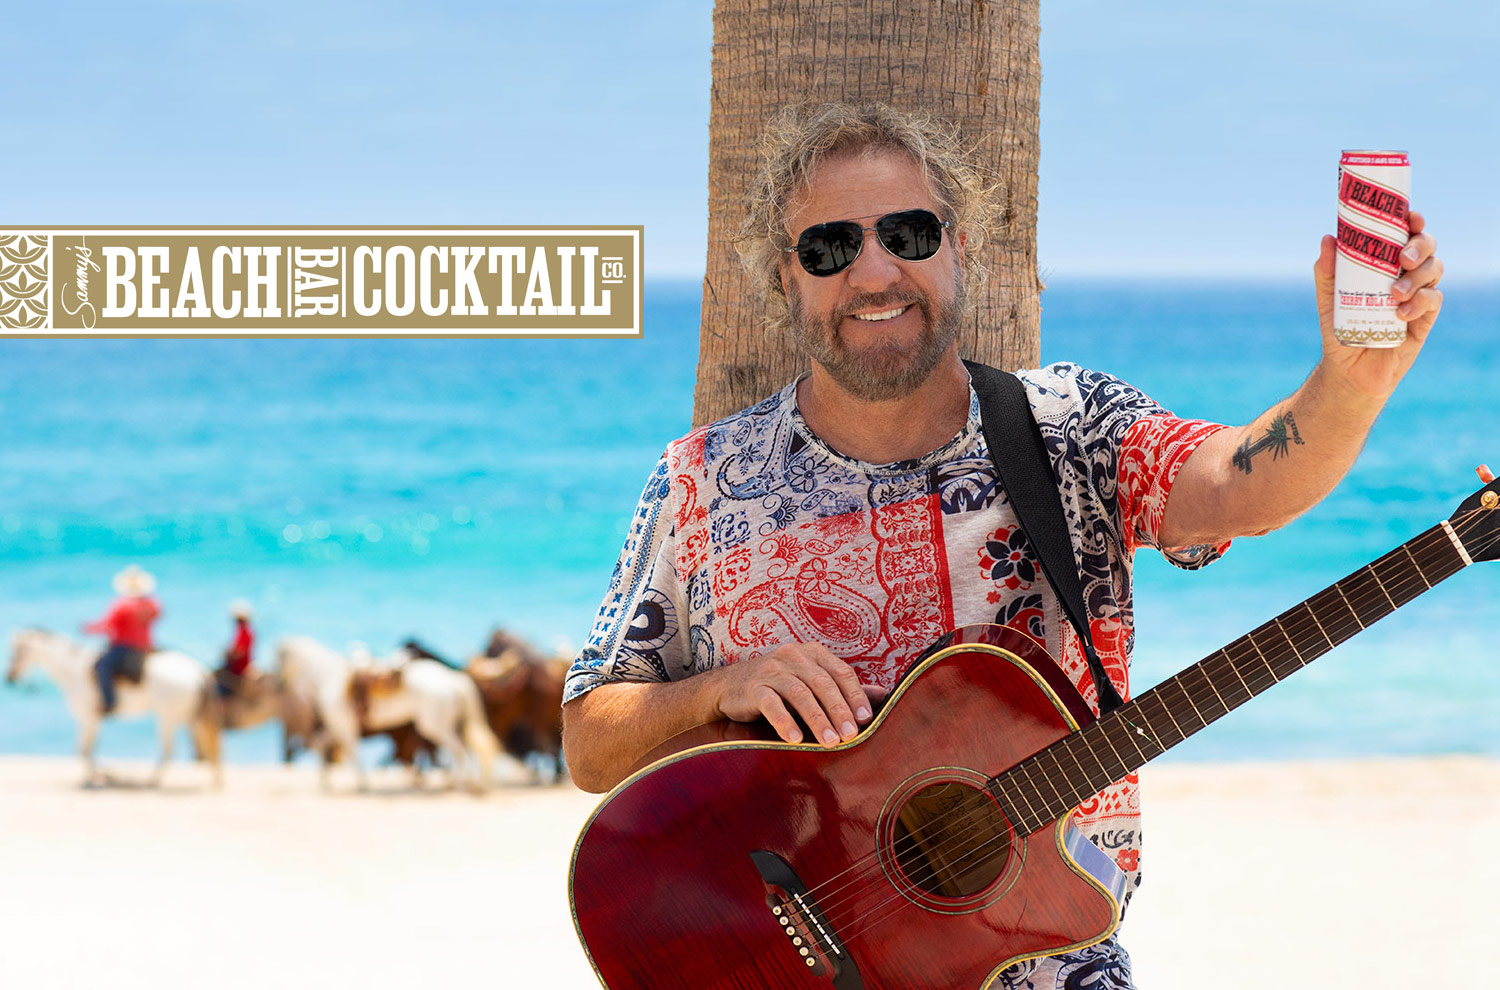 Image for post about Sparkling Rum Cocktails: Sammy Hagar And His Beach Bar Cocktail Company